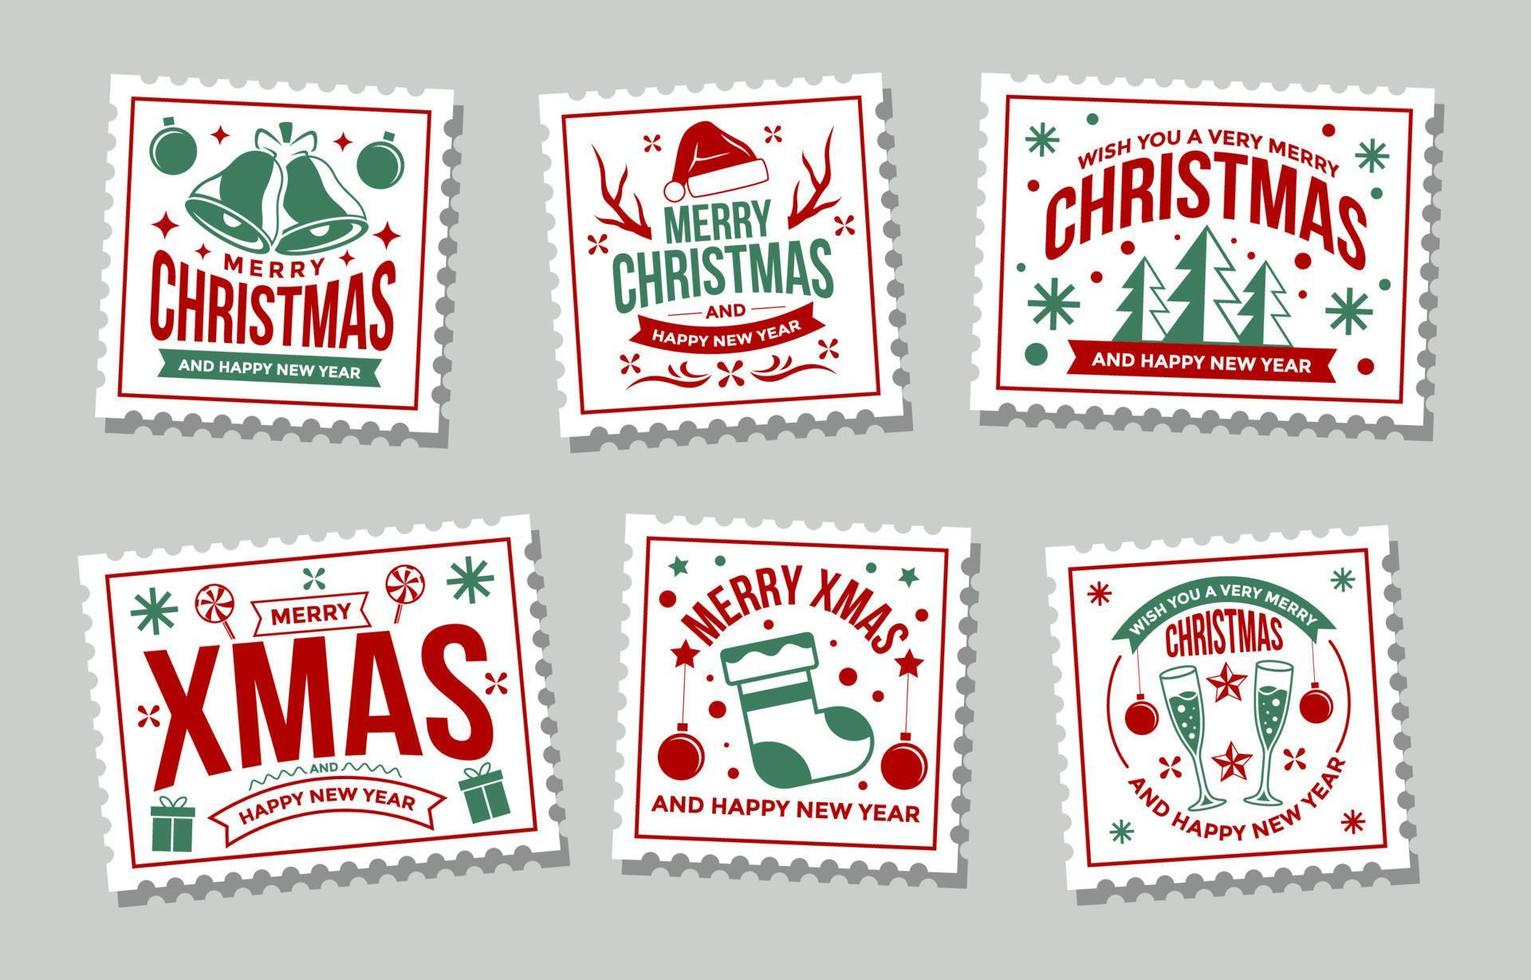 Merry Christmas Stamp Sticker vector